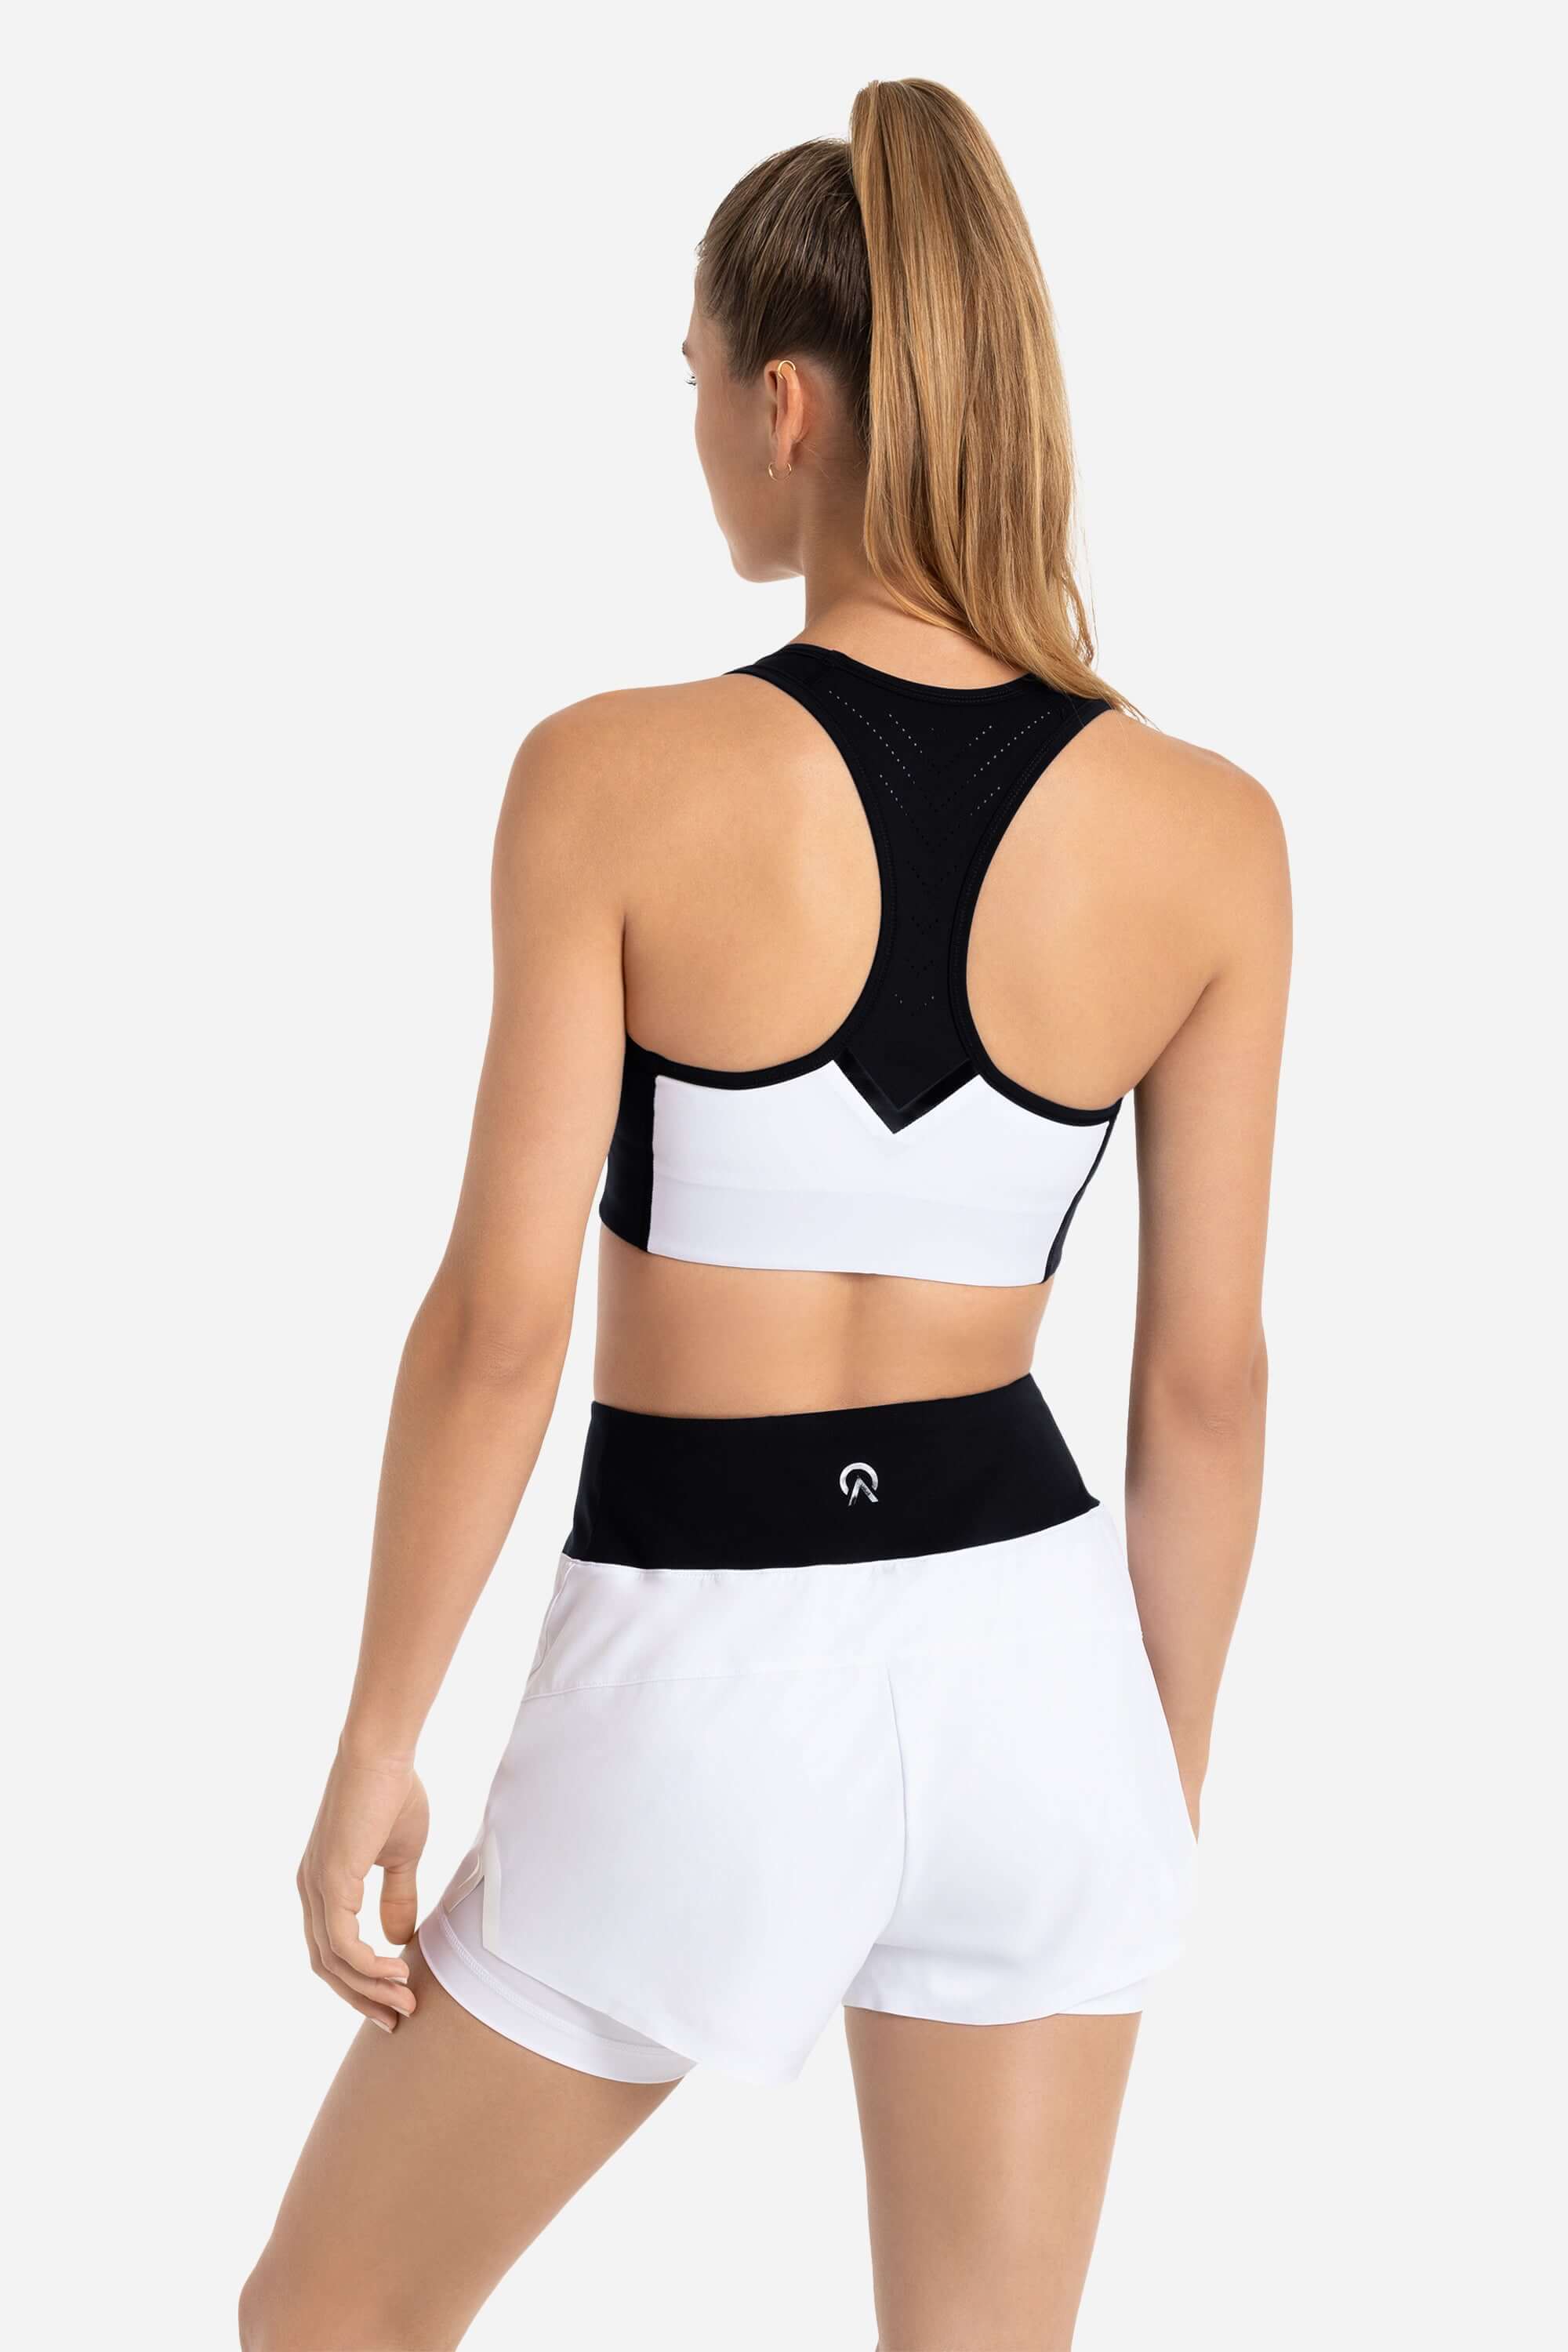 Women workout and gym sports bra and shorts white - black